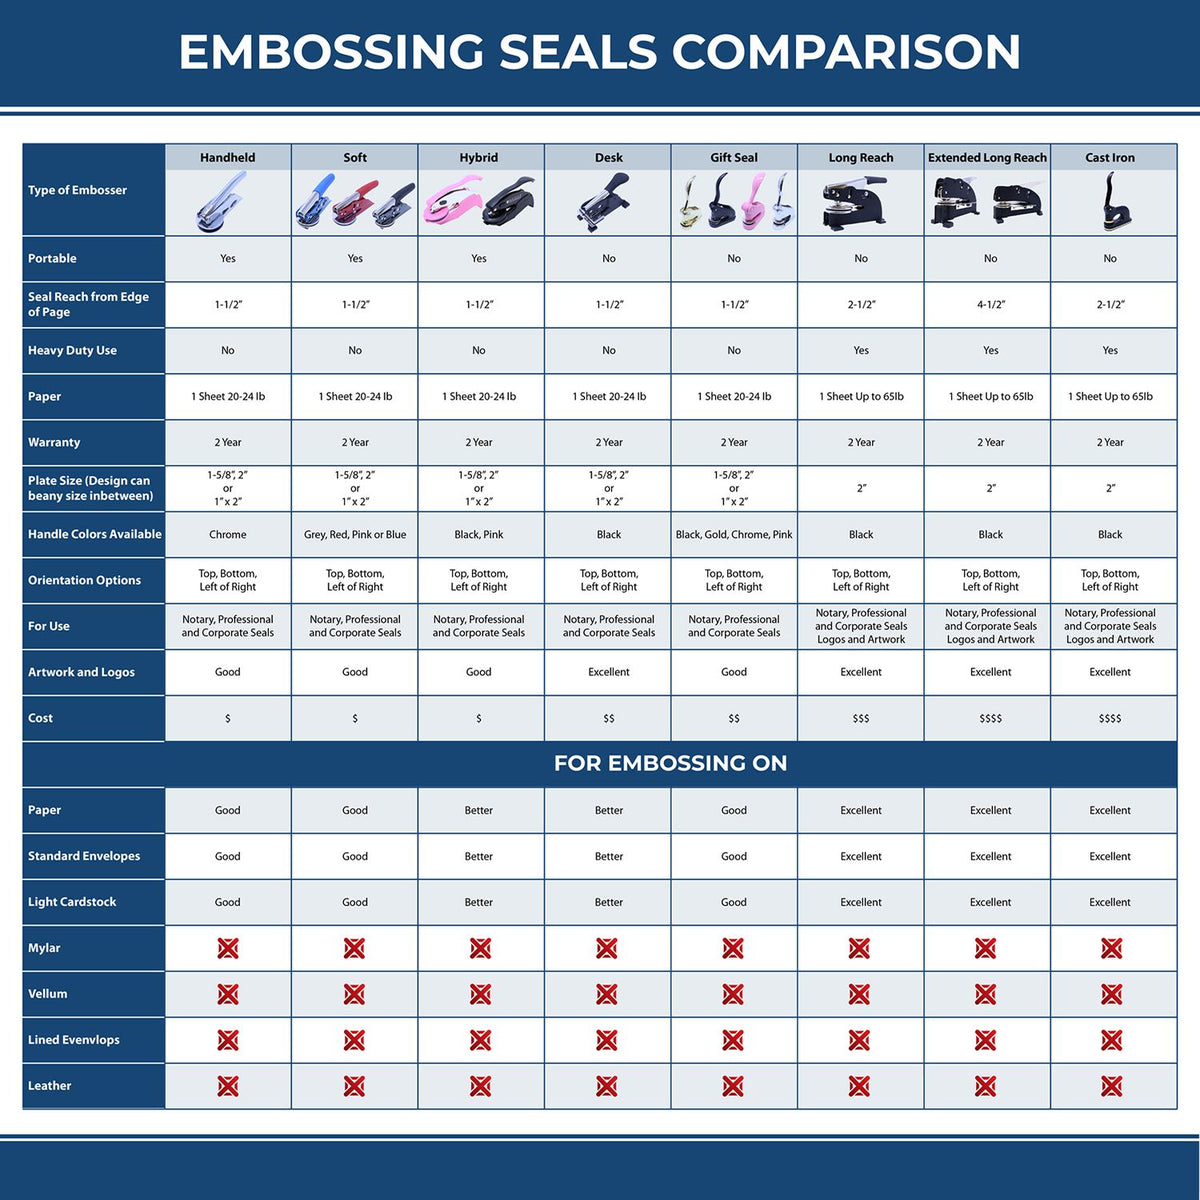 A comparison chart for the different types of mount models available for the Soft Kentucky Professional Geologist Seal